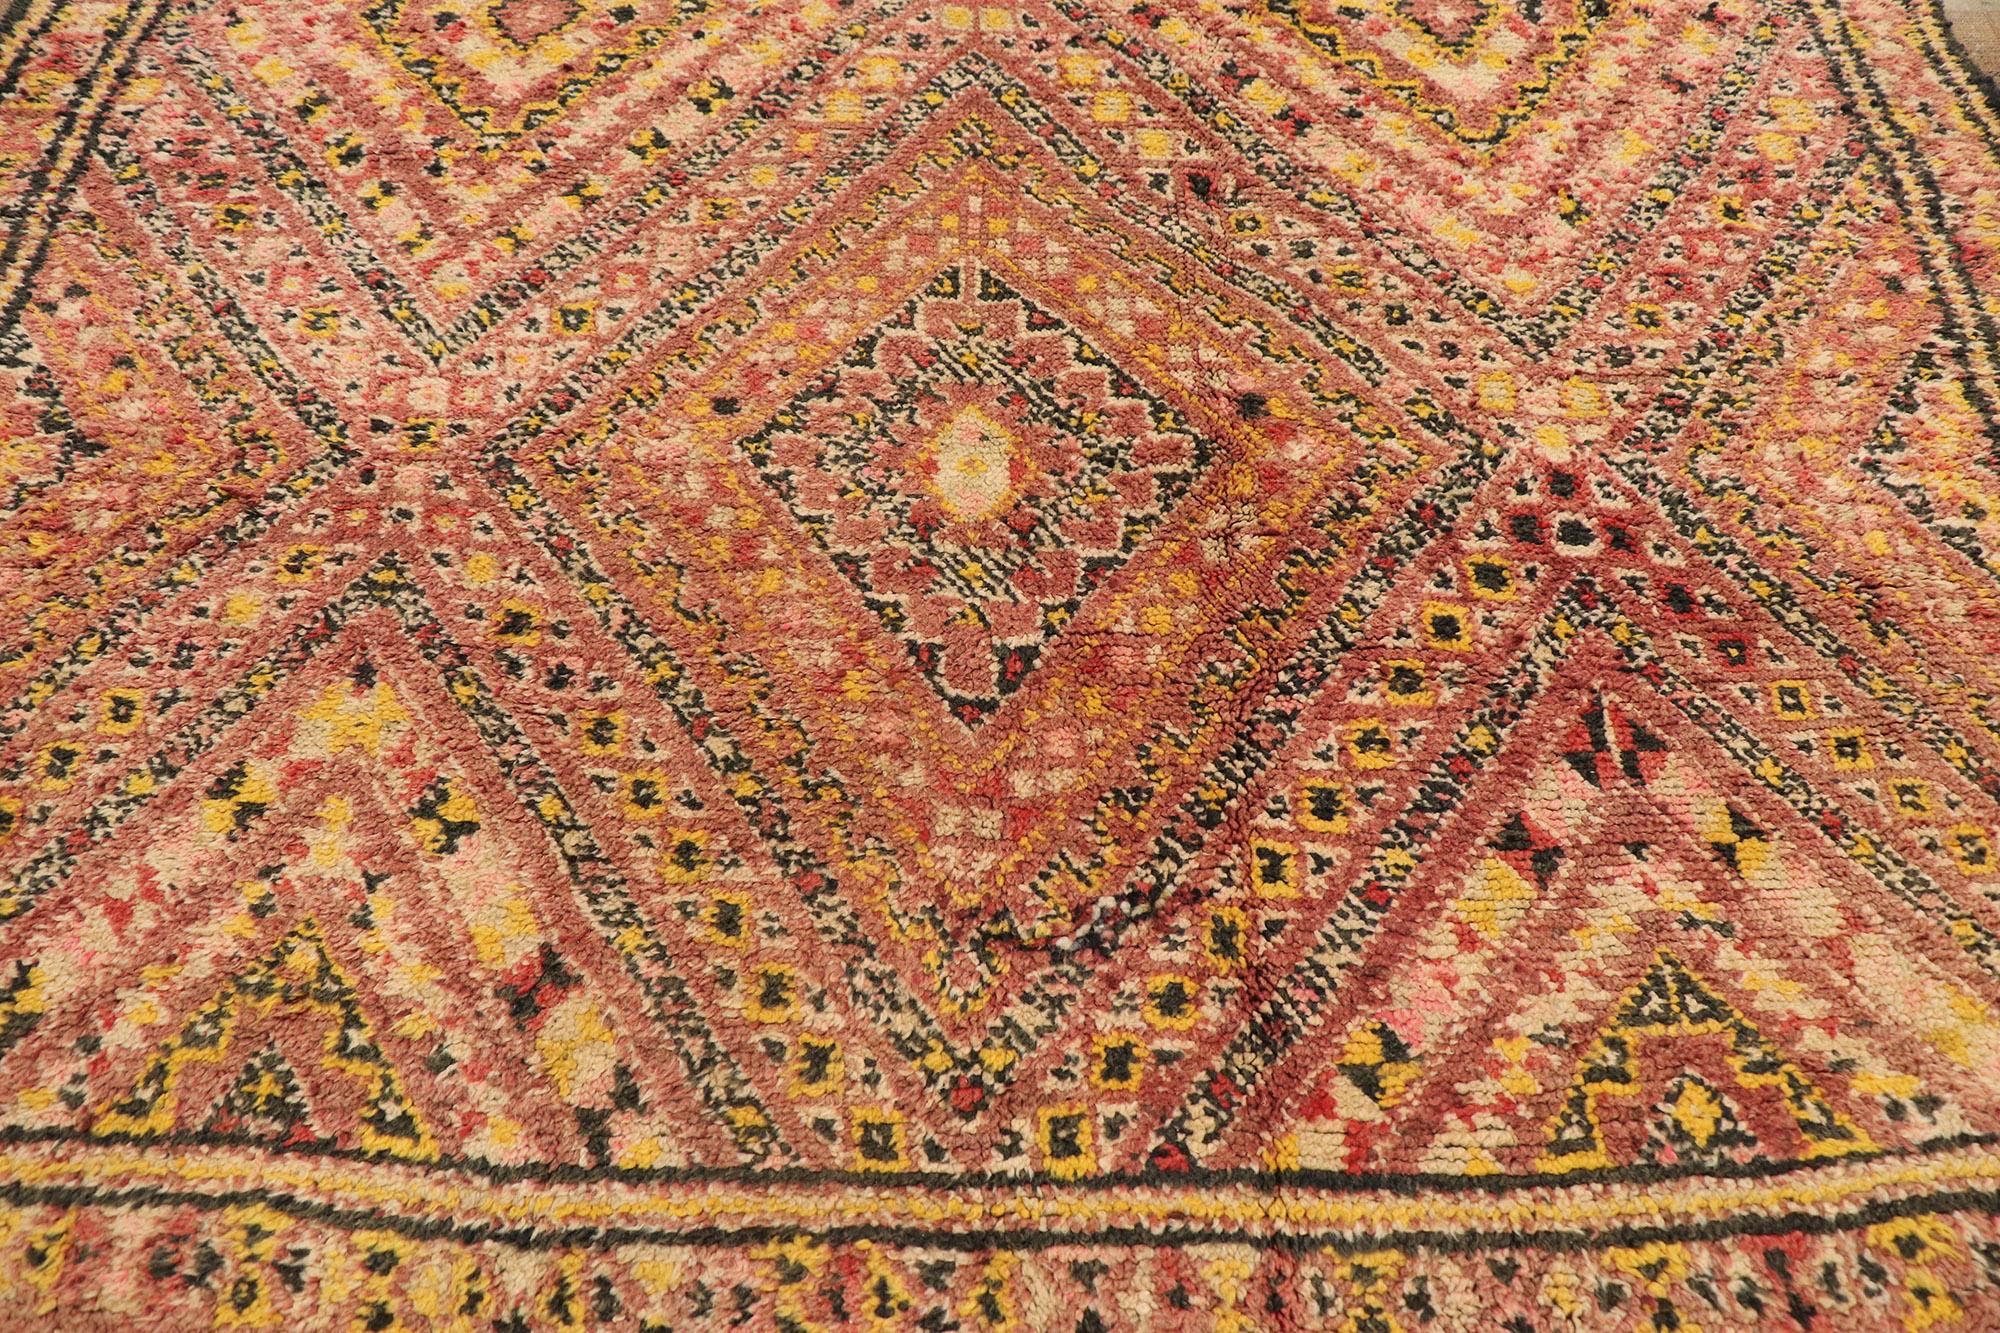 Vintage Berber Beni M'Guild Moroccan Rug with Mid-Century Modern Style In Good Condition For Sale In Dallas, TX